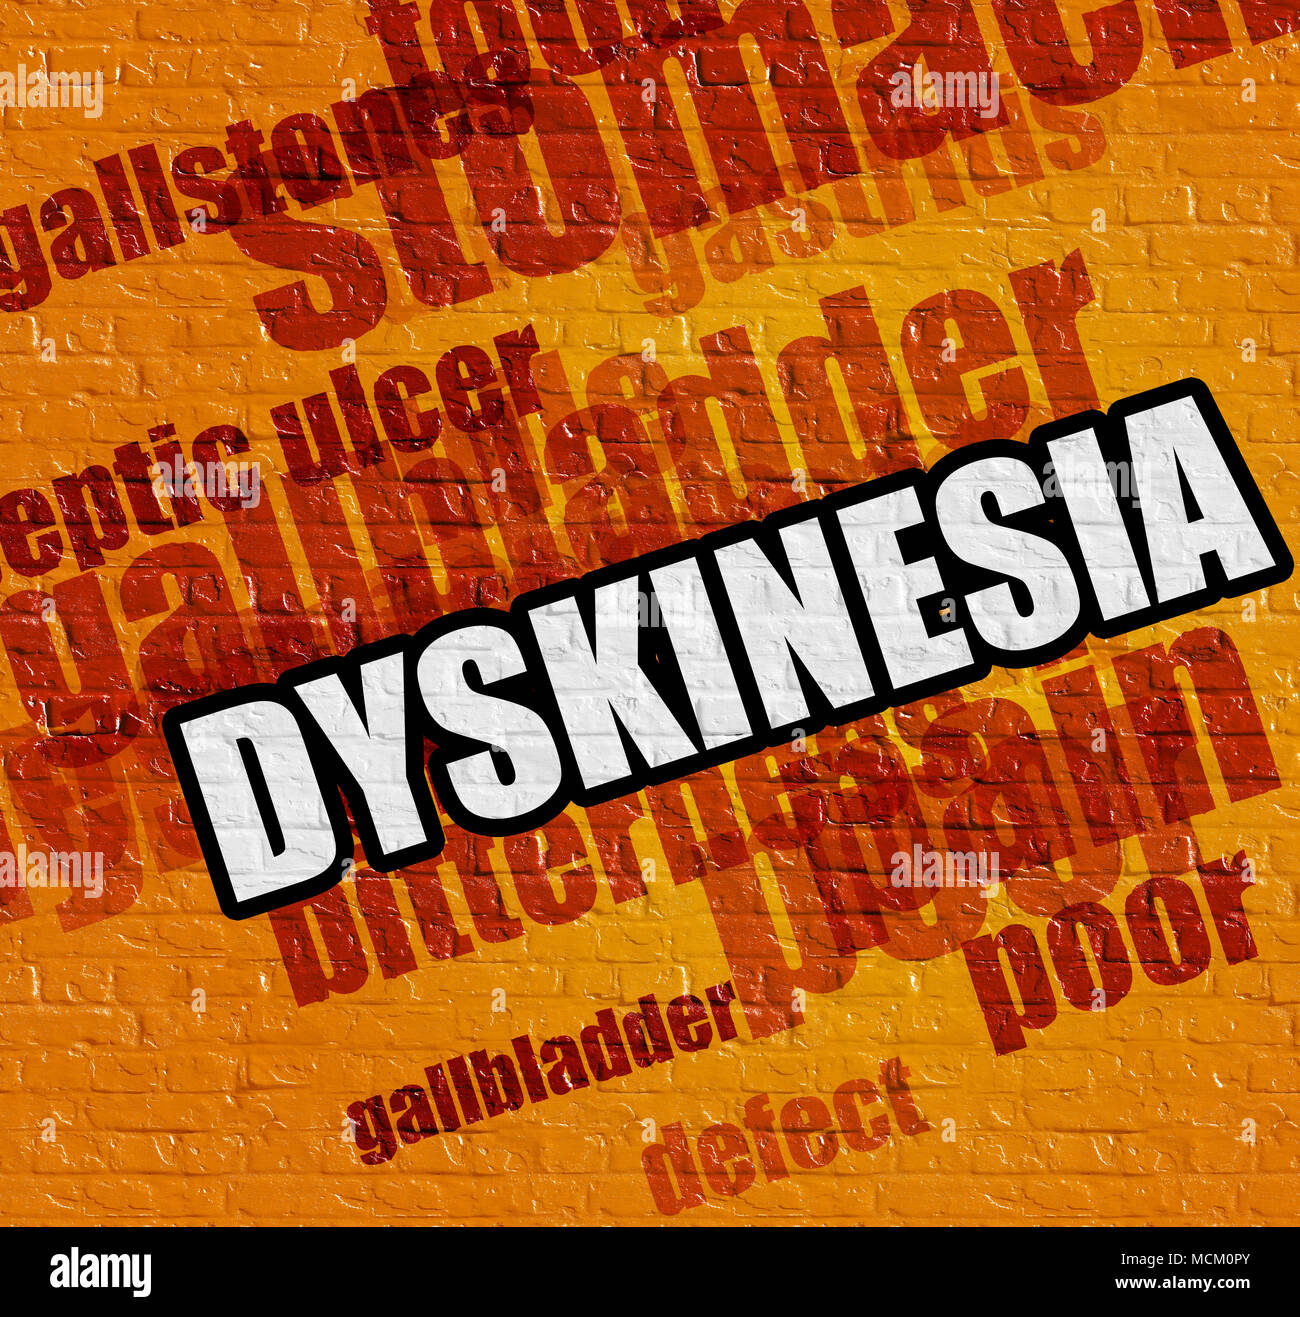 Health concept: Dyskinesia on the Yellow Wall . Stock Photo